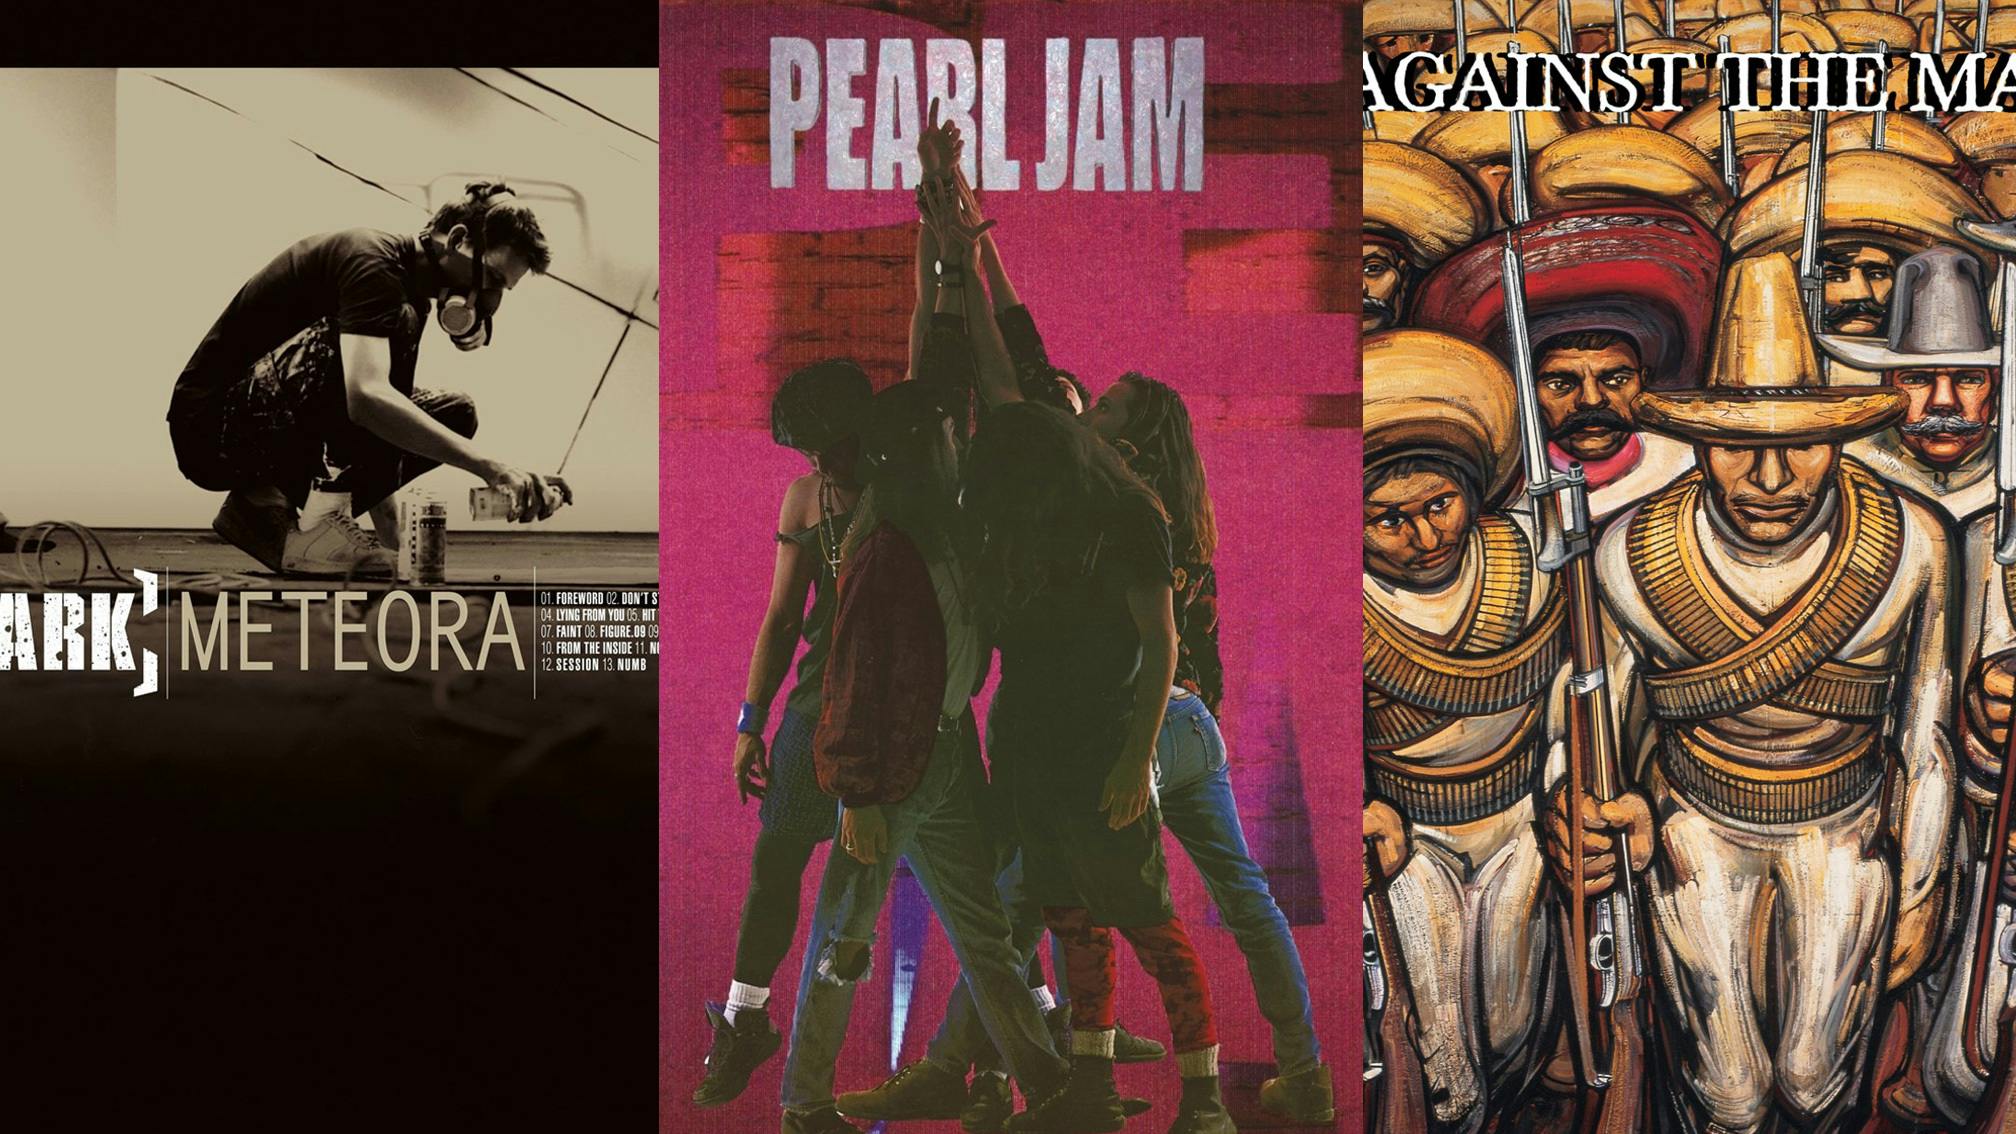 Linkin Park, RATM, Pearl Jam, Deftones and more announce special Record Store Day 2021 releases